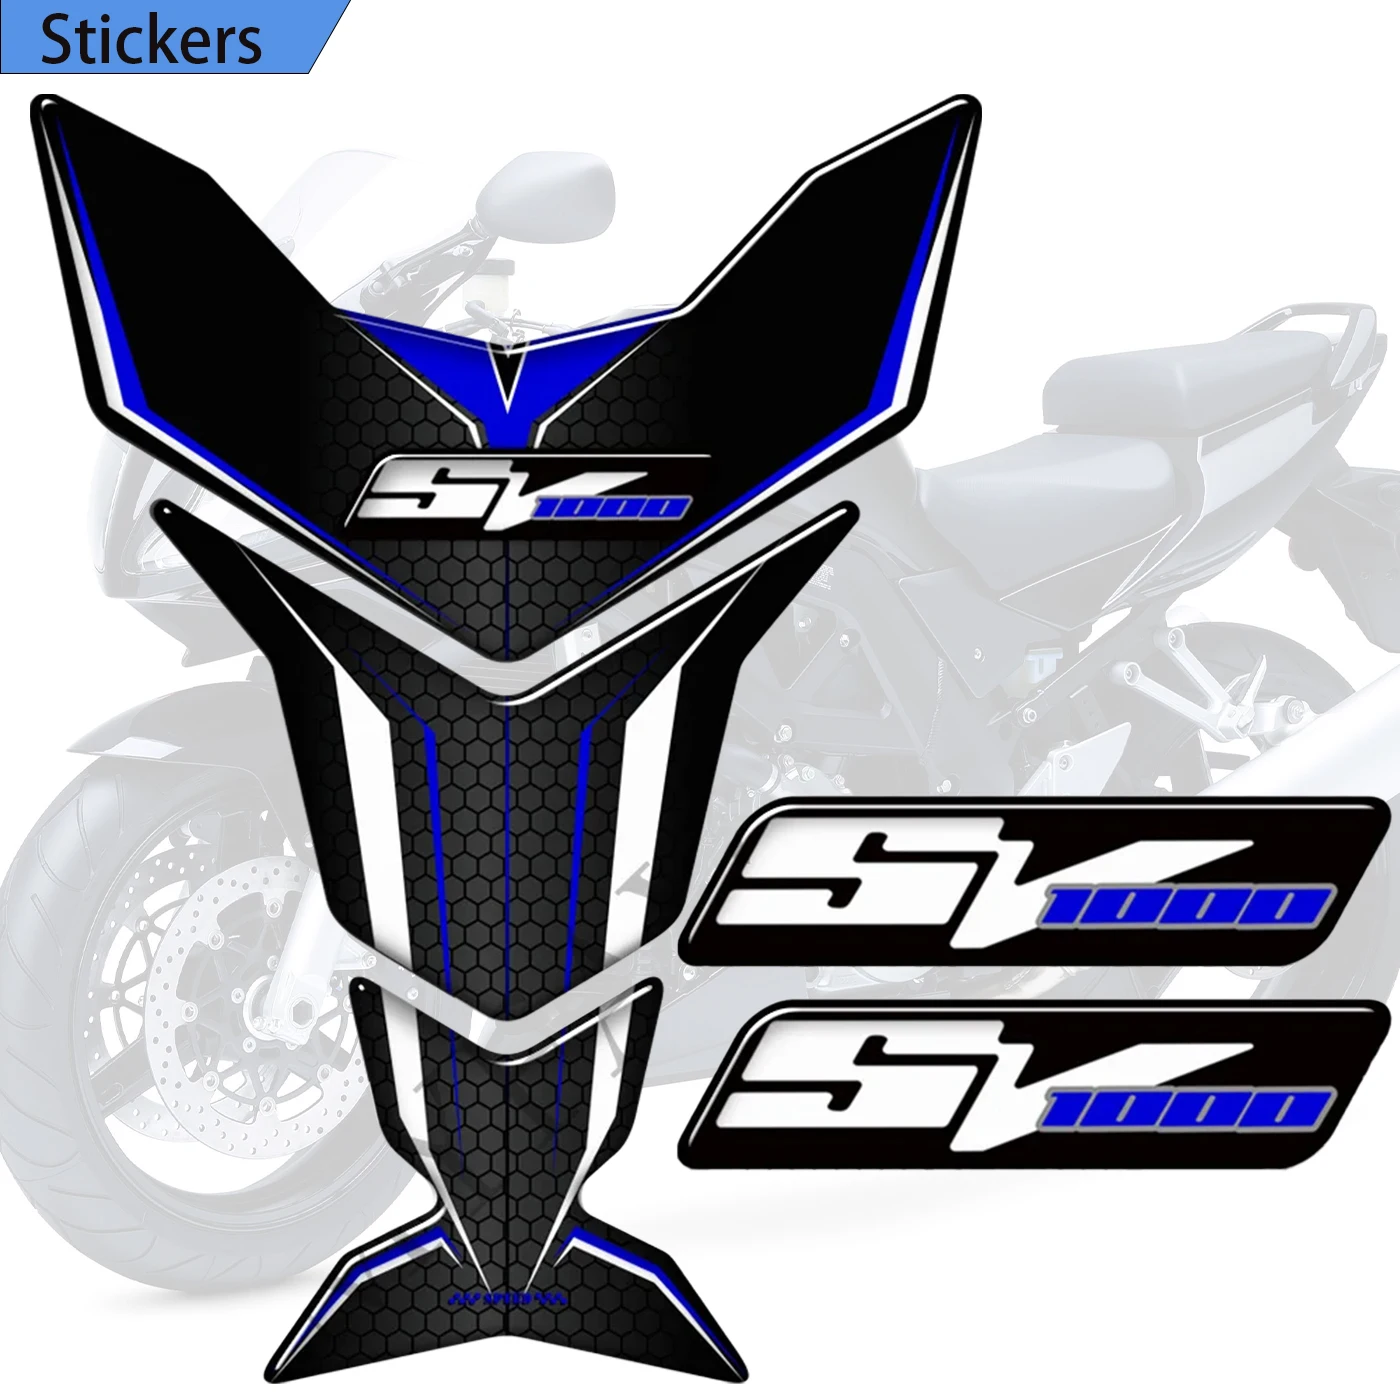 SV1000 SV 1000 S Fit Suzuki SV1000 SV 1000 S Tank Pad Fuel Protector  Stickers Decals Knee maisto 1 12 suzuki gsx r1000 fuel tank alloy motorcycle genuine classic brand die casting model collectible gift toy